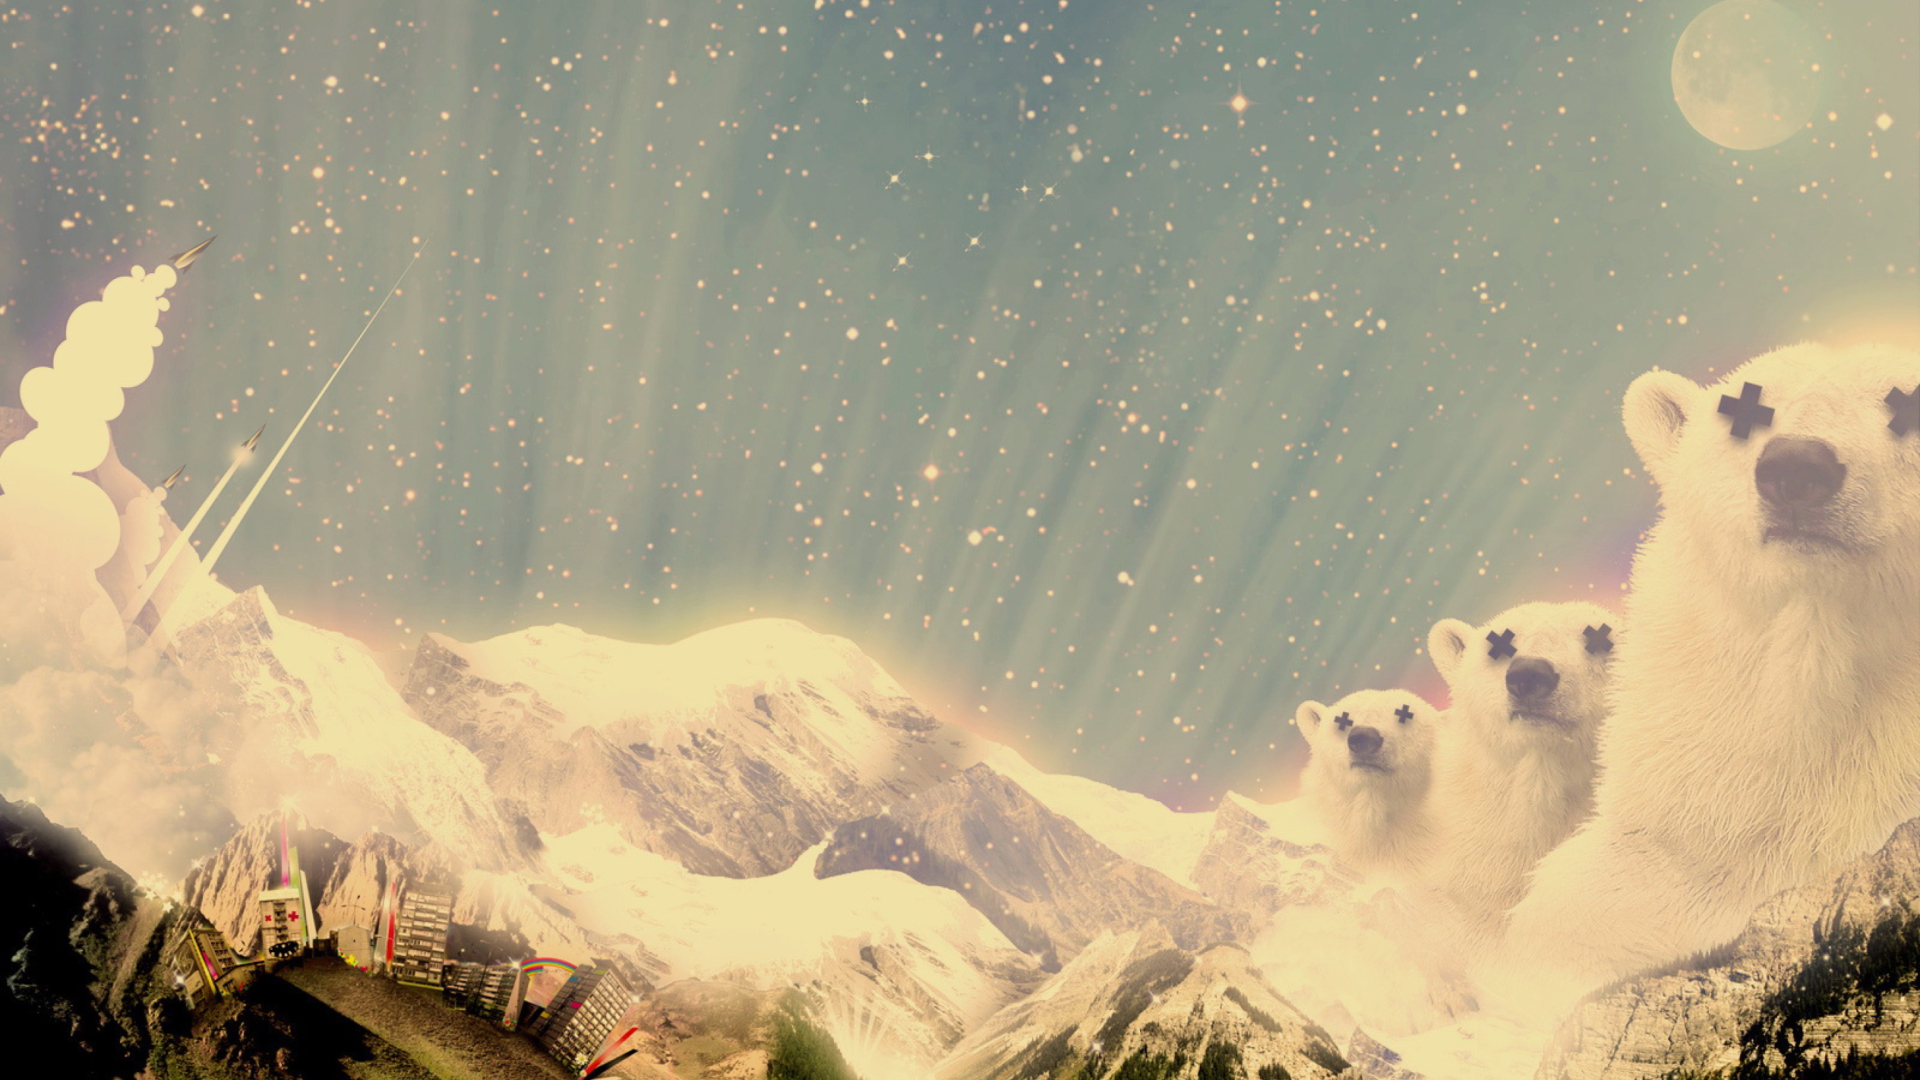 Abstract Mountains And Bears wallpaper 1920x1080